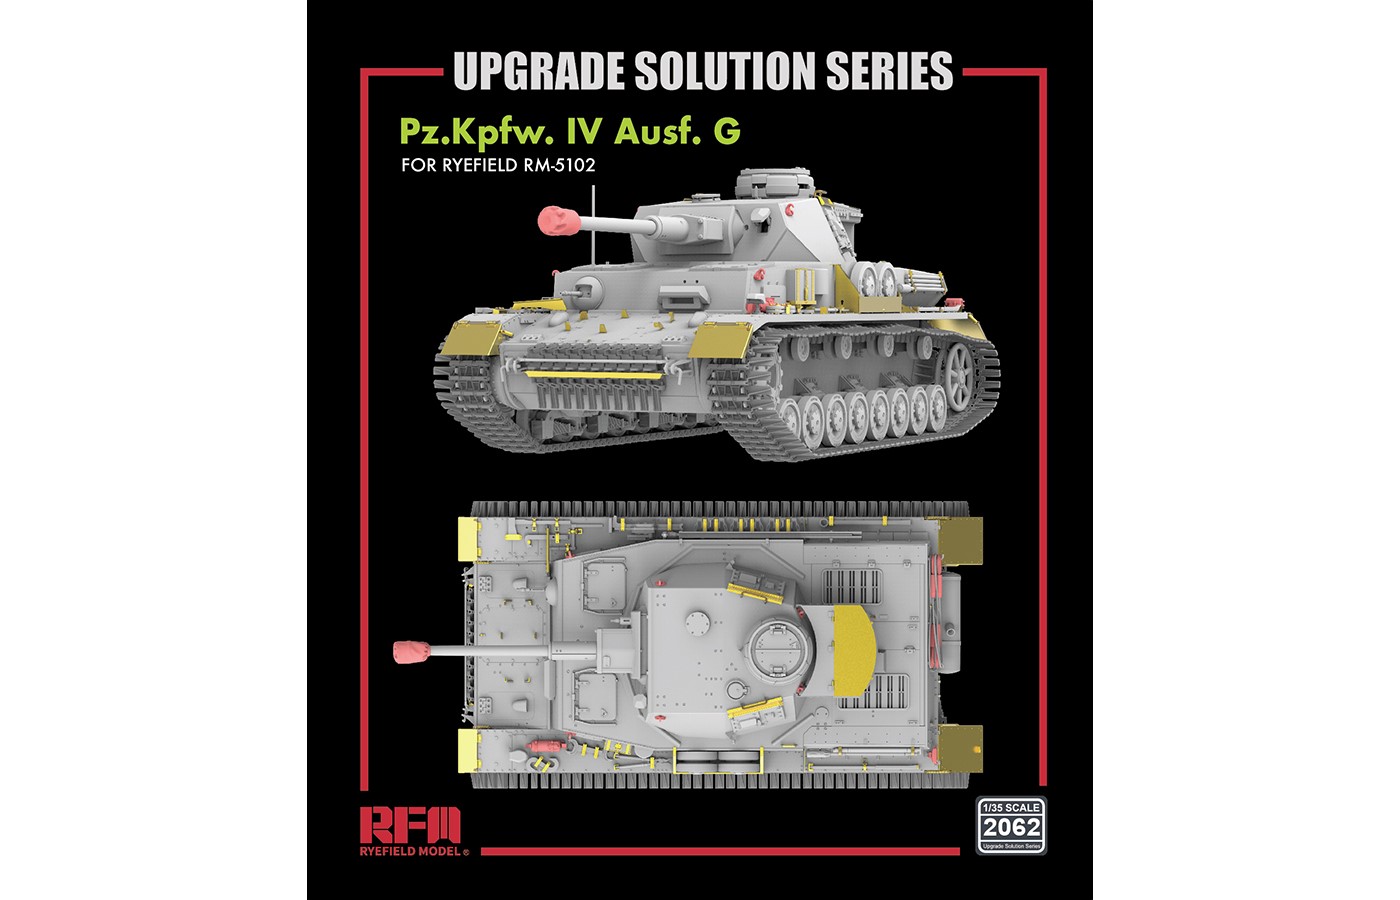 1/35 Pz.Kpfw. IV Ausf. G Upgrade Solution Series - Upgrade set for RM5102